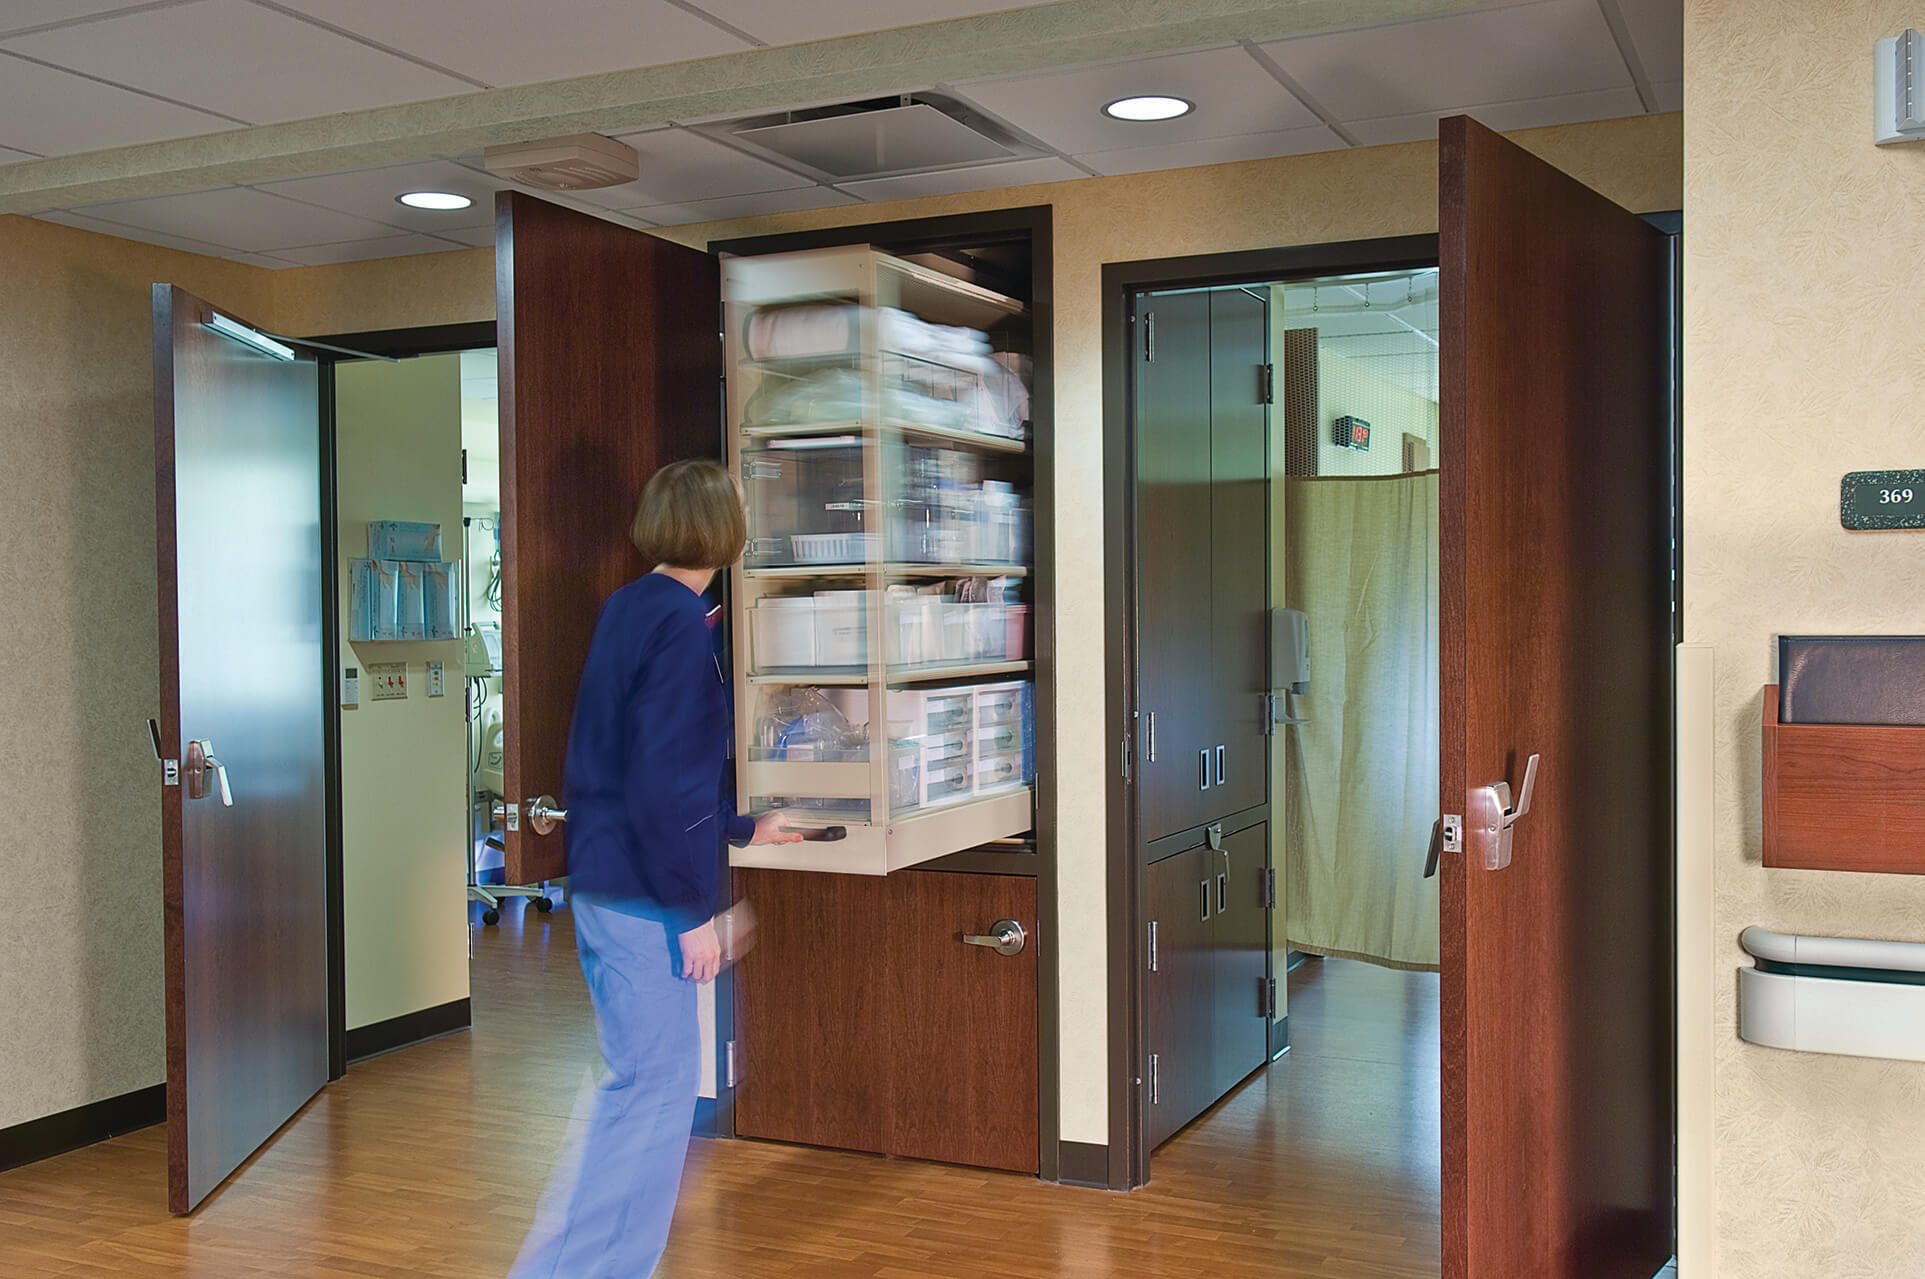 Patient Server allows easy access to supplies outside of the room